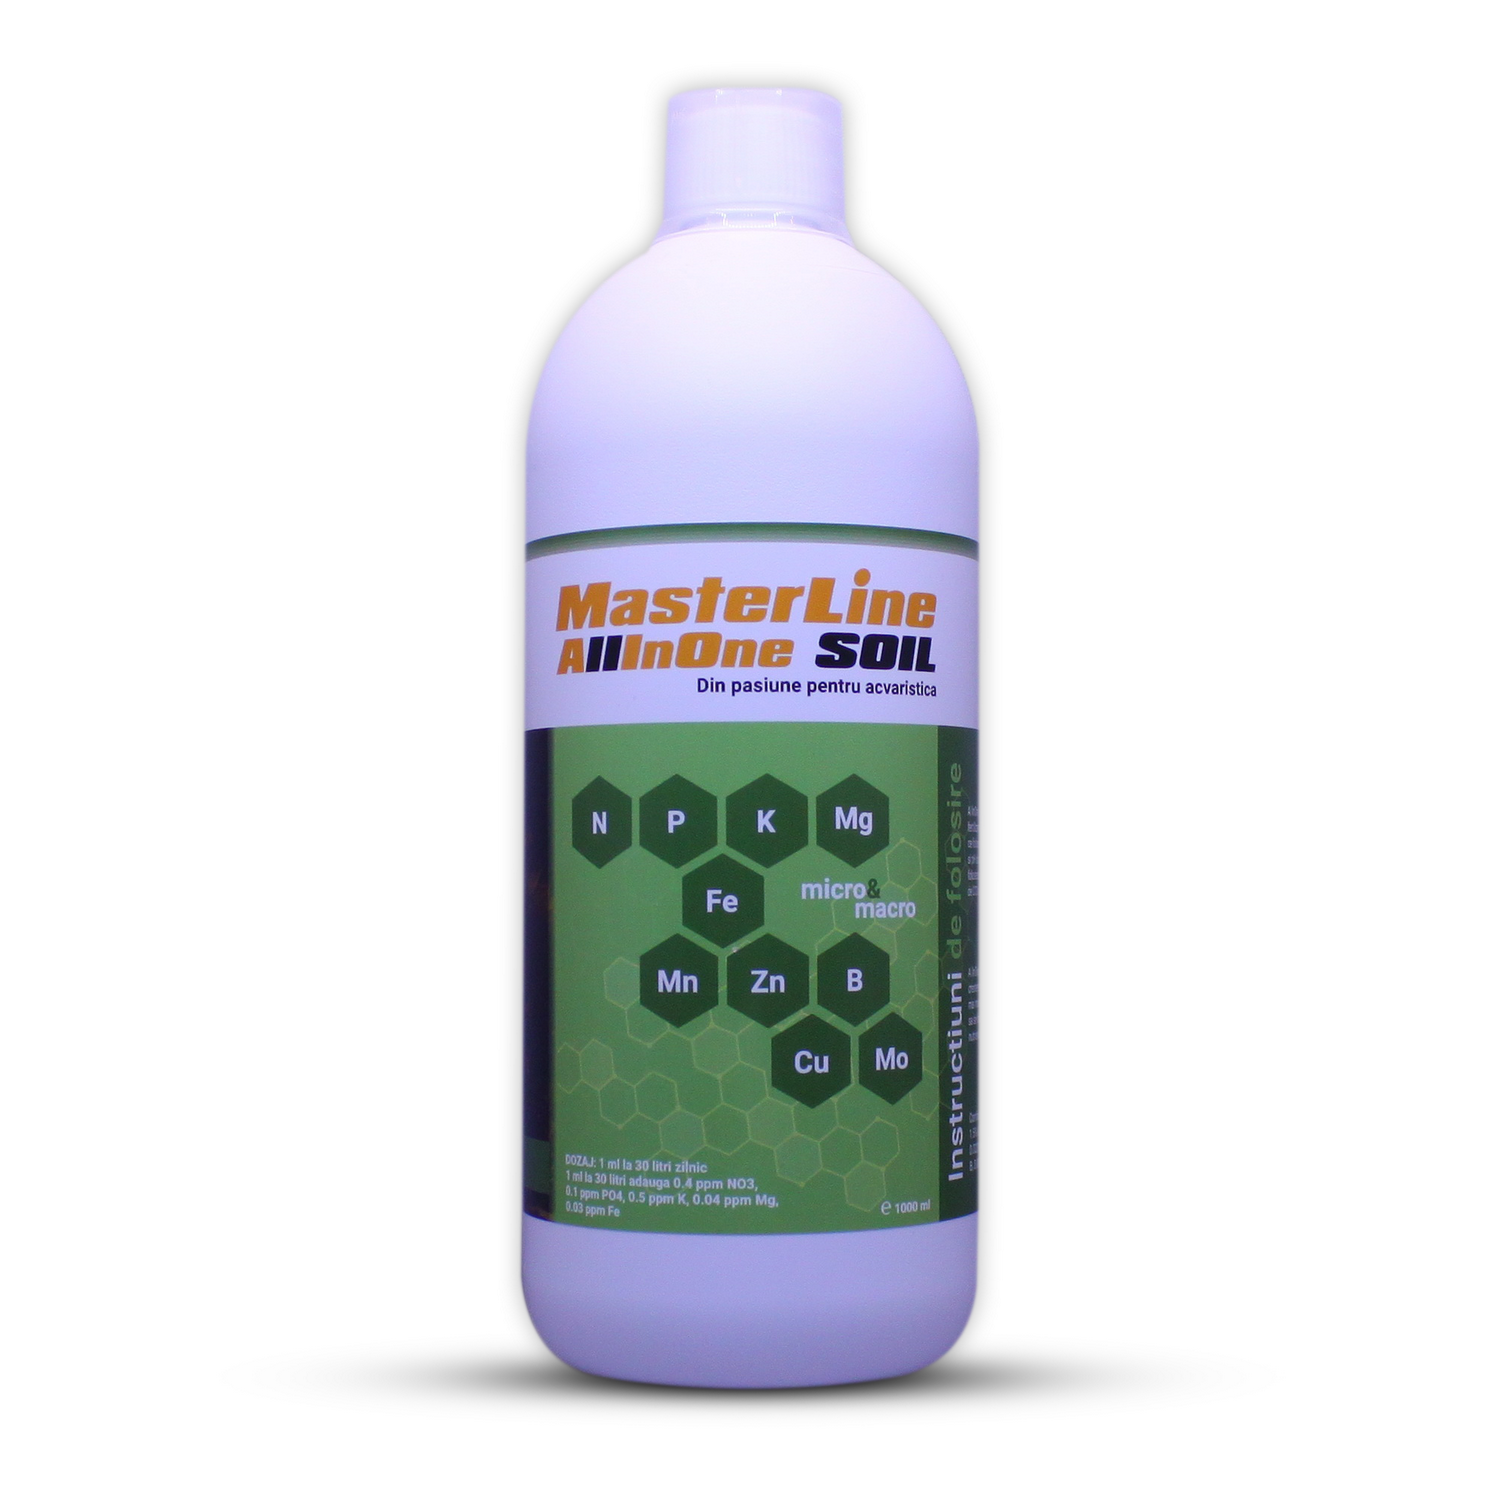 MasterLine All In One Lean